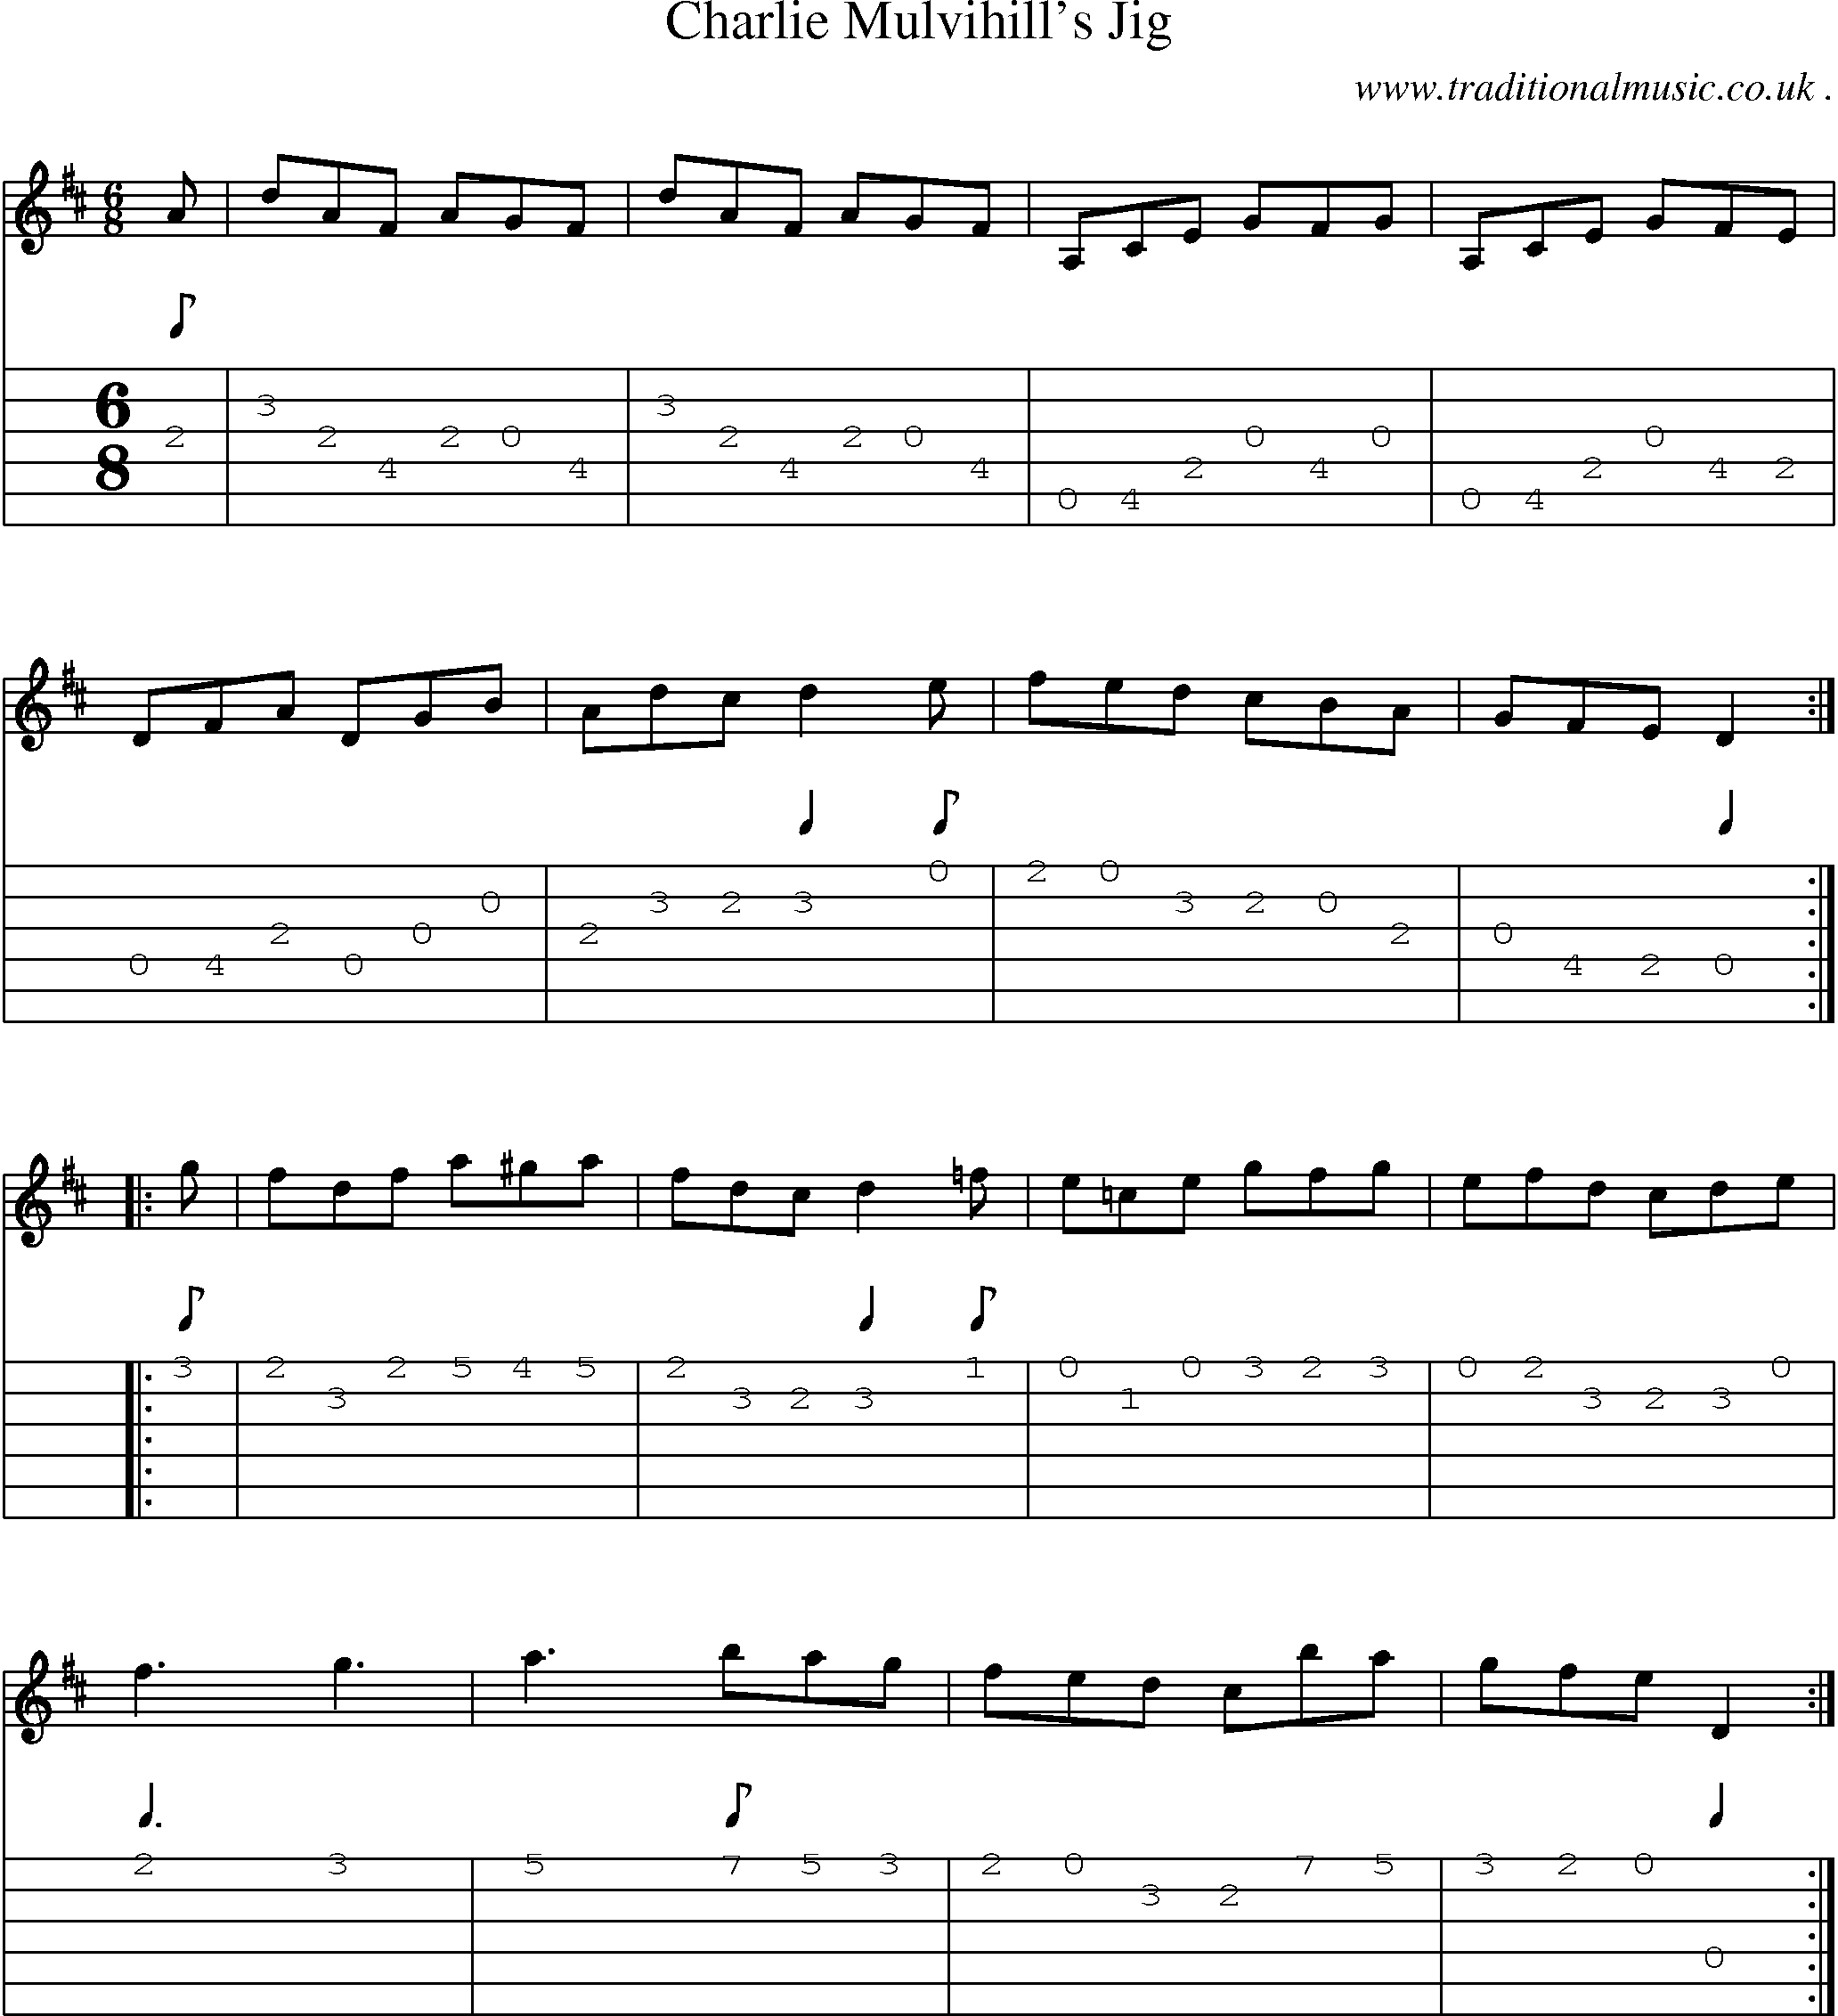 Sheet-Music and Guitar Tabs for Charlie Mulvihills Jig